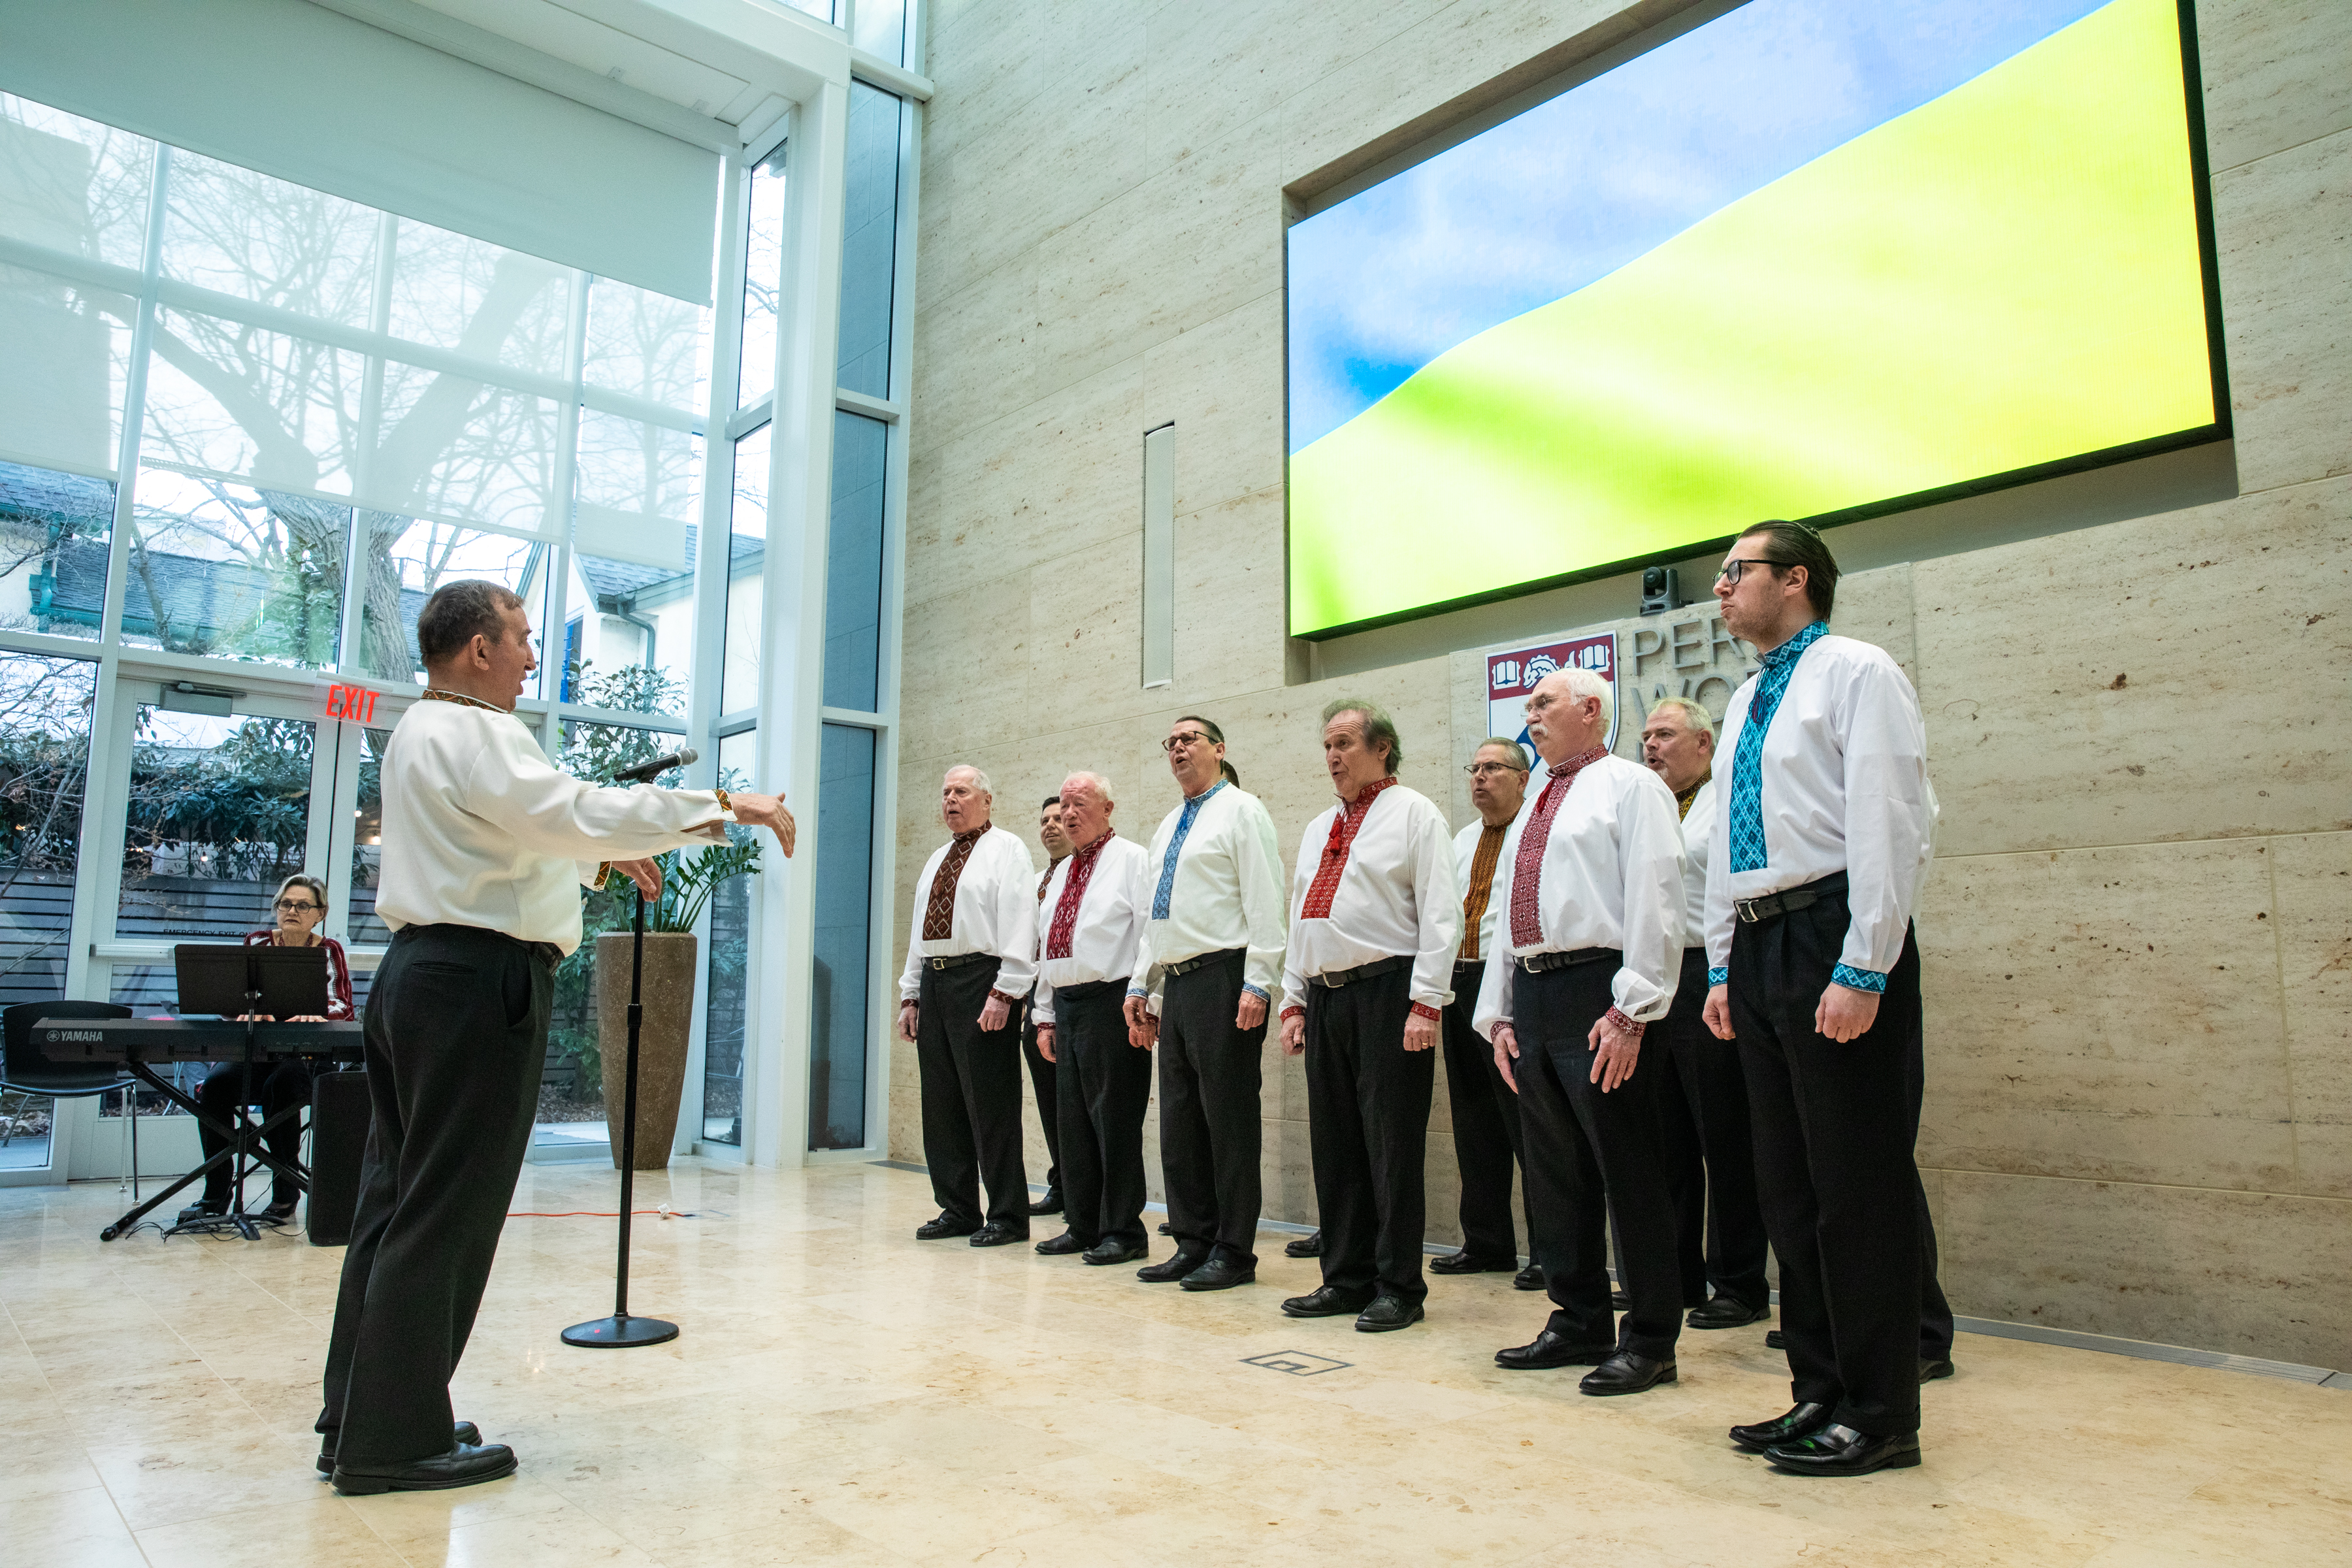 Members of the Ukrainian choir singing at Perry World House.